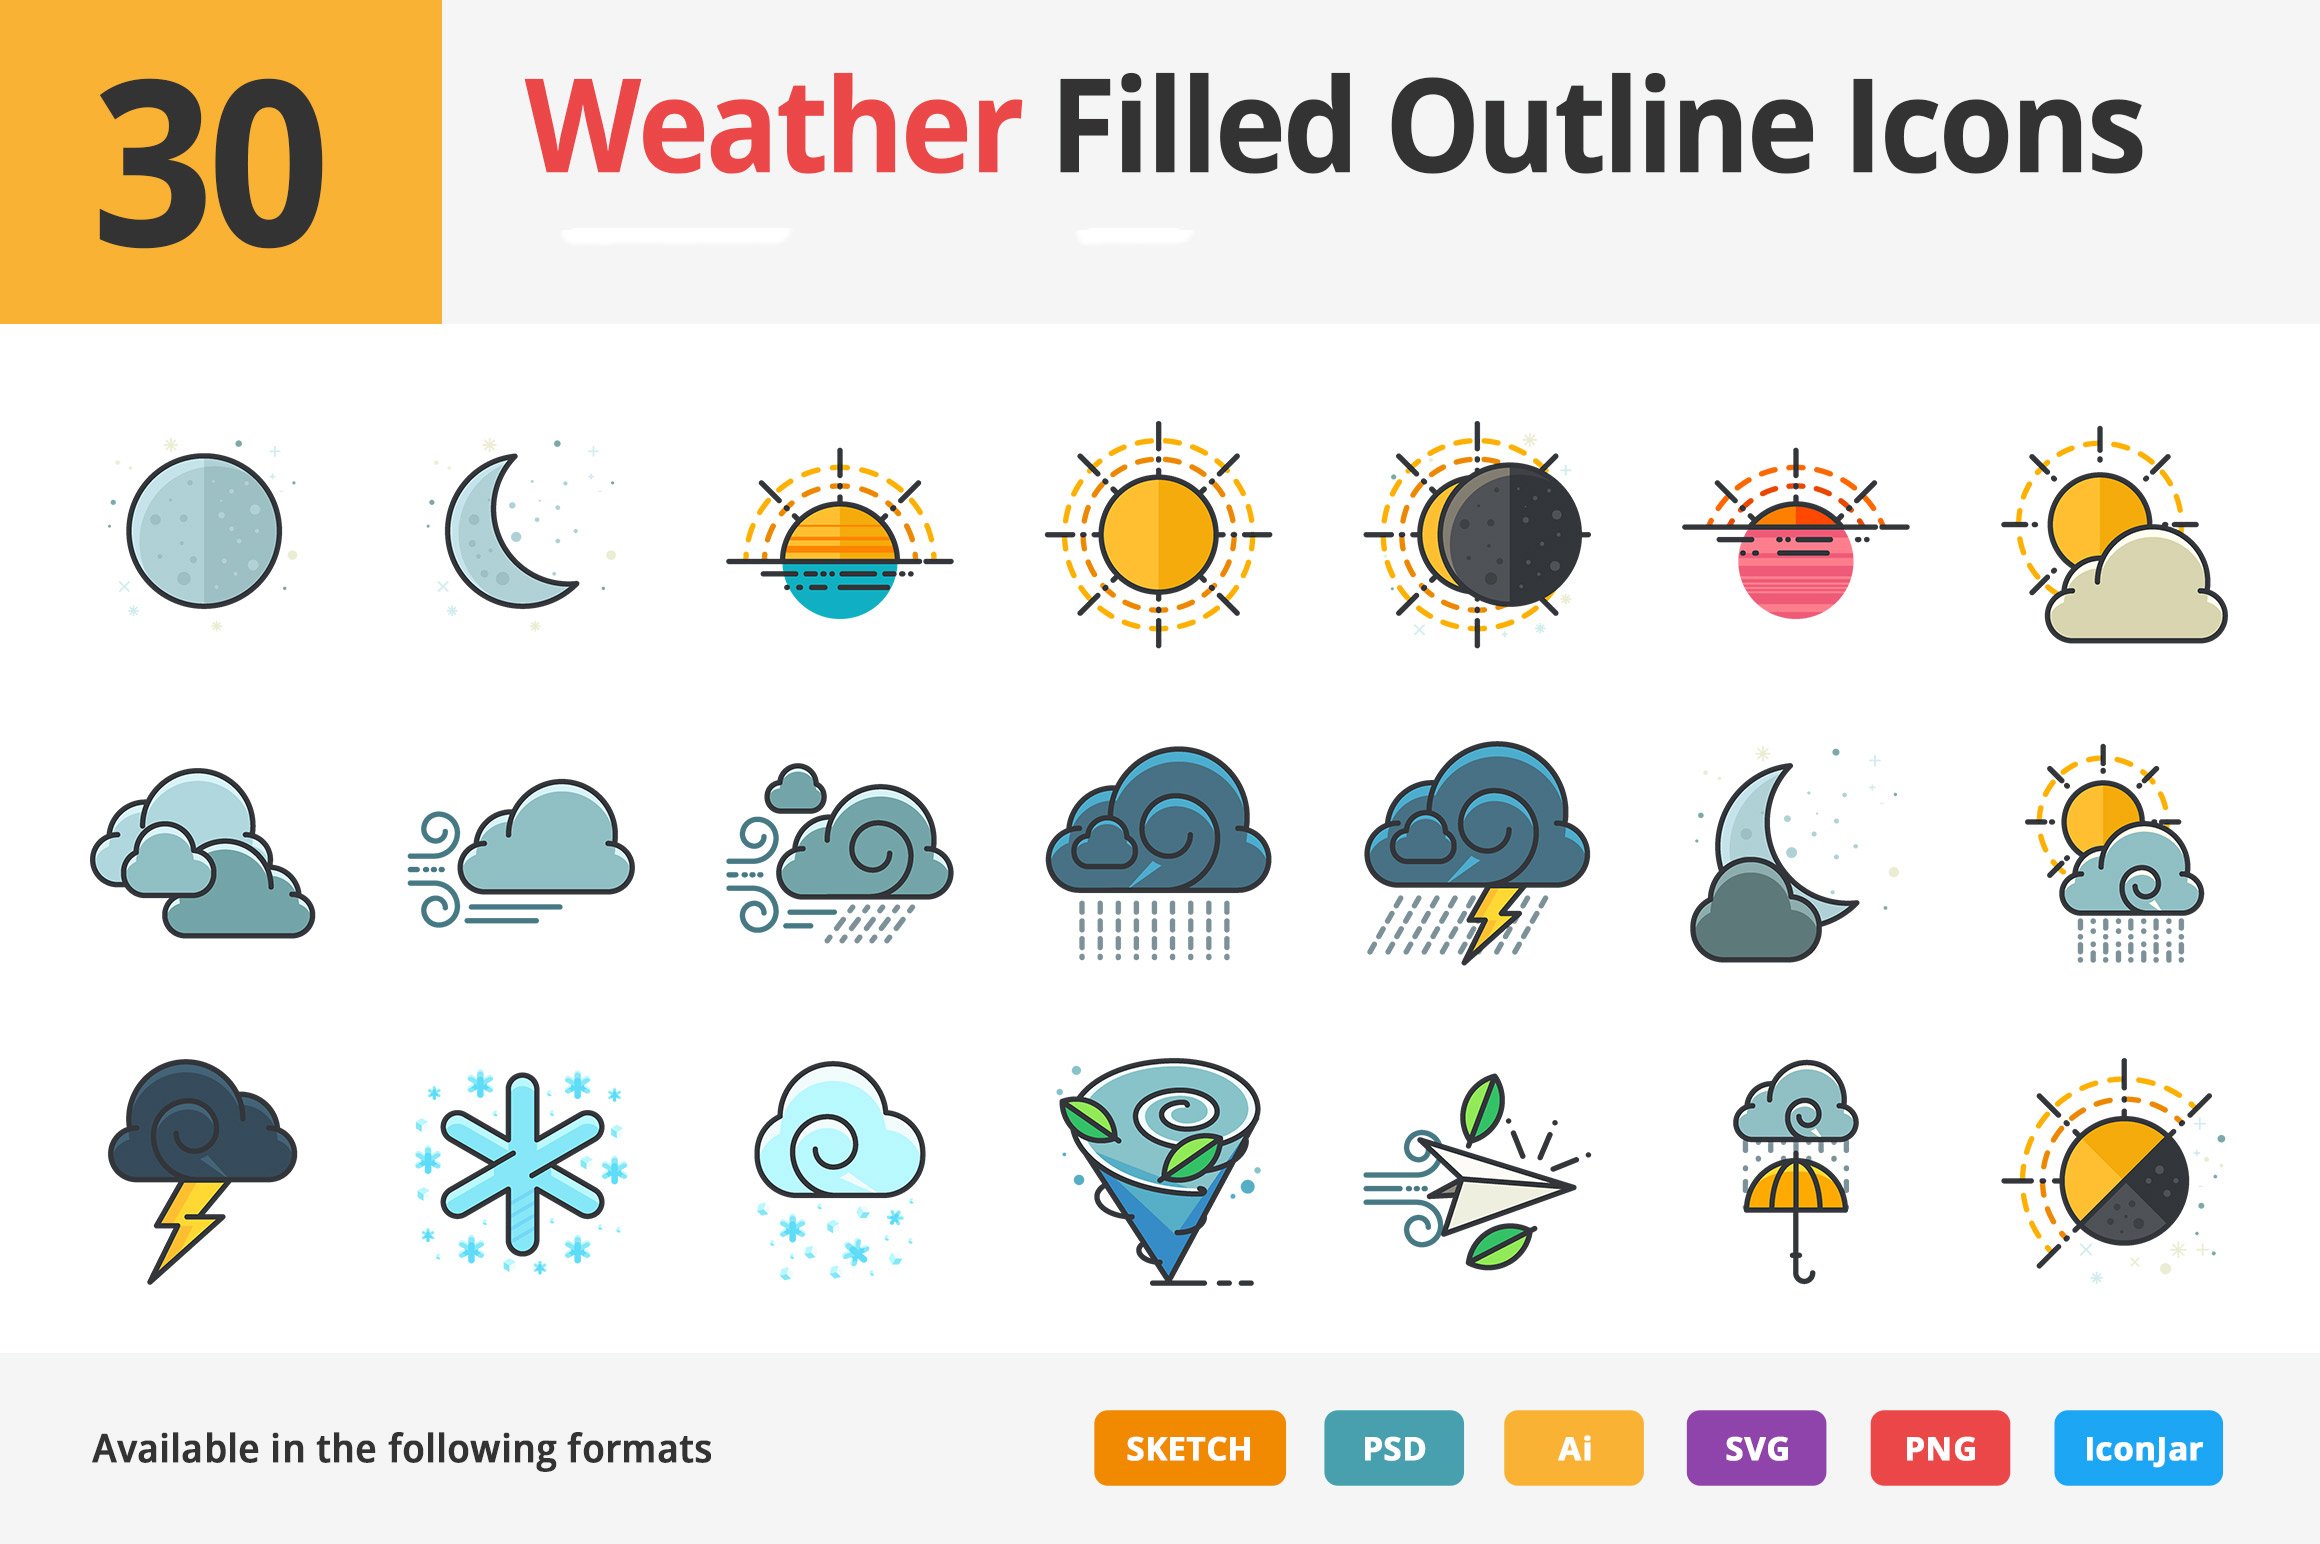 30 Weather Filled Outline Icons preview image.